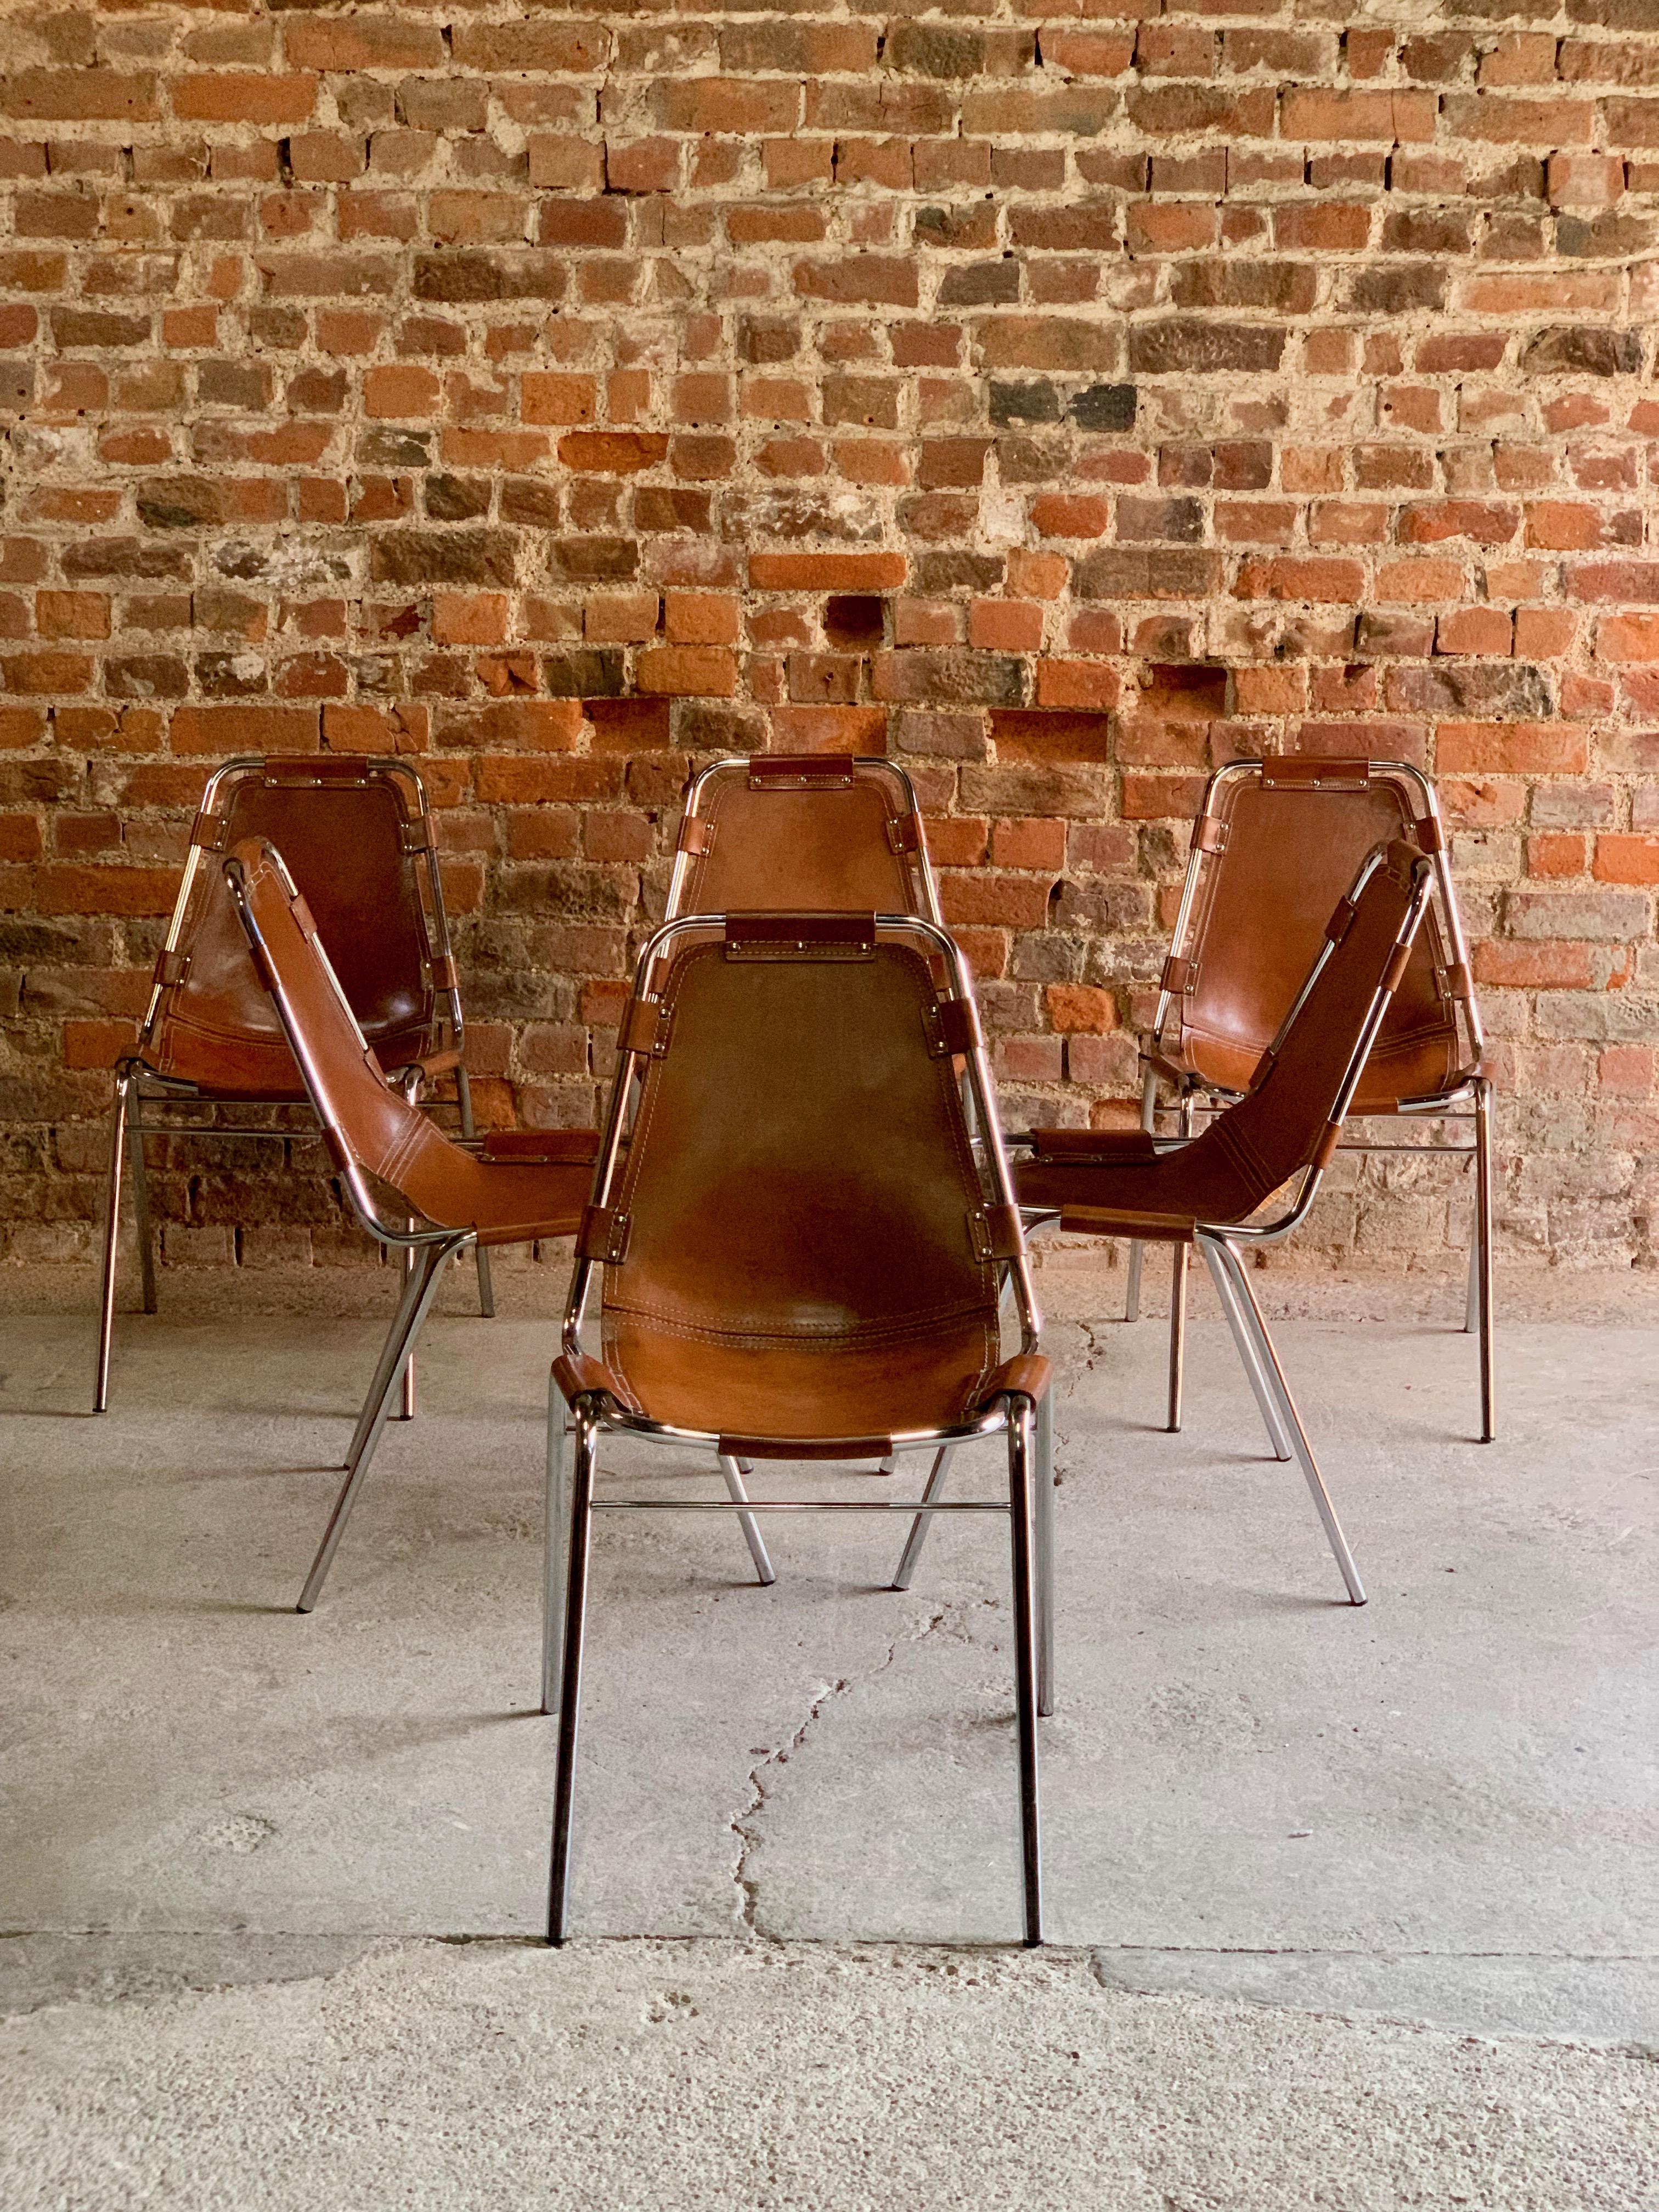 Les Arcs' Six Dining Chairs, 1970s

Fabulous set of six tan leather 'Les Arcs' dining chairs manufactured by the Italian firm, Dal Vera, and selected by Charlotte Perriand for the Les Arcs ski resort, each chair consists of a chrome tubular frame